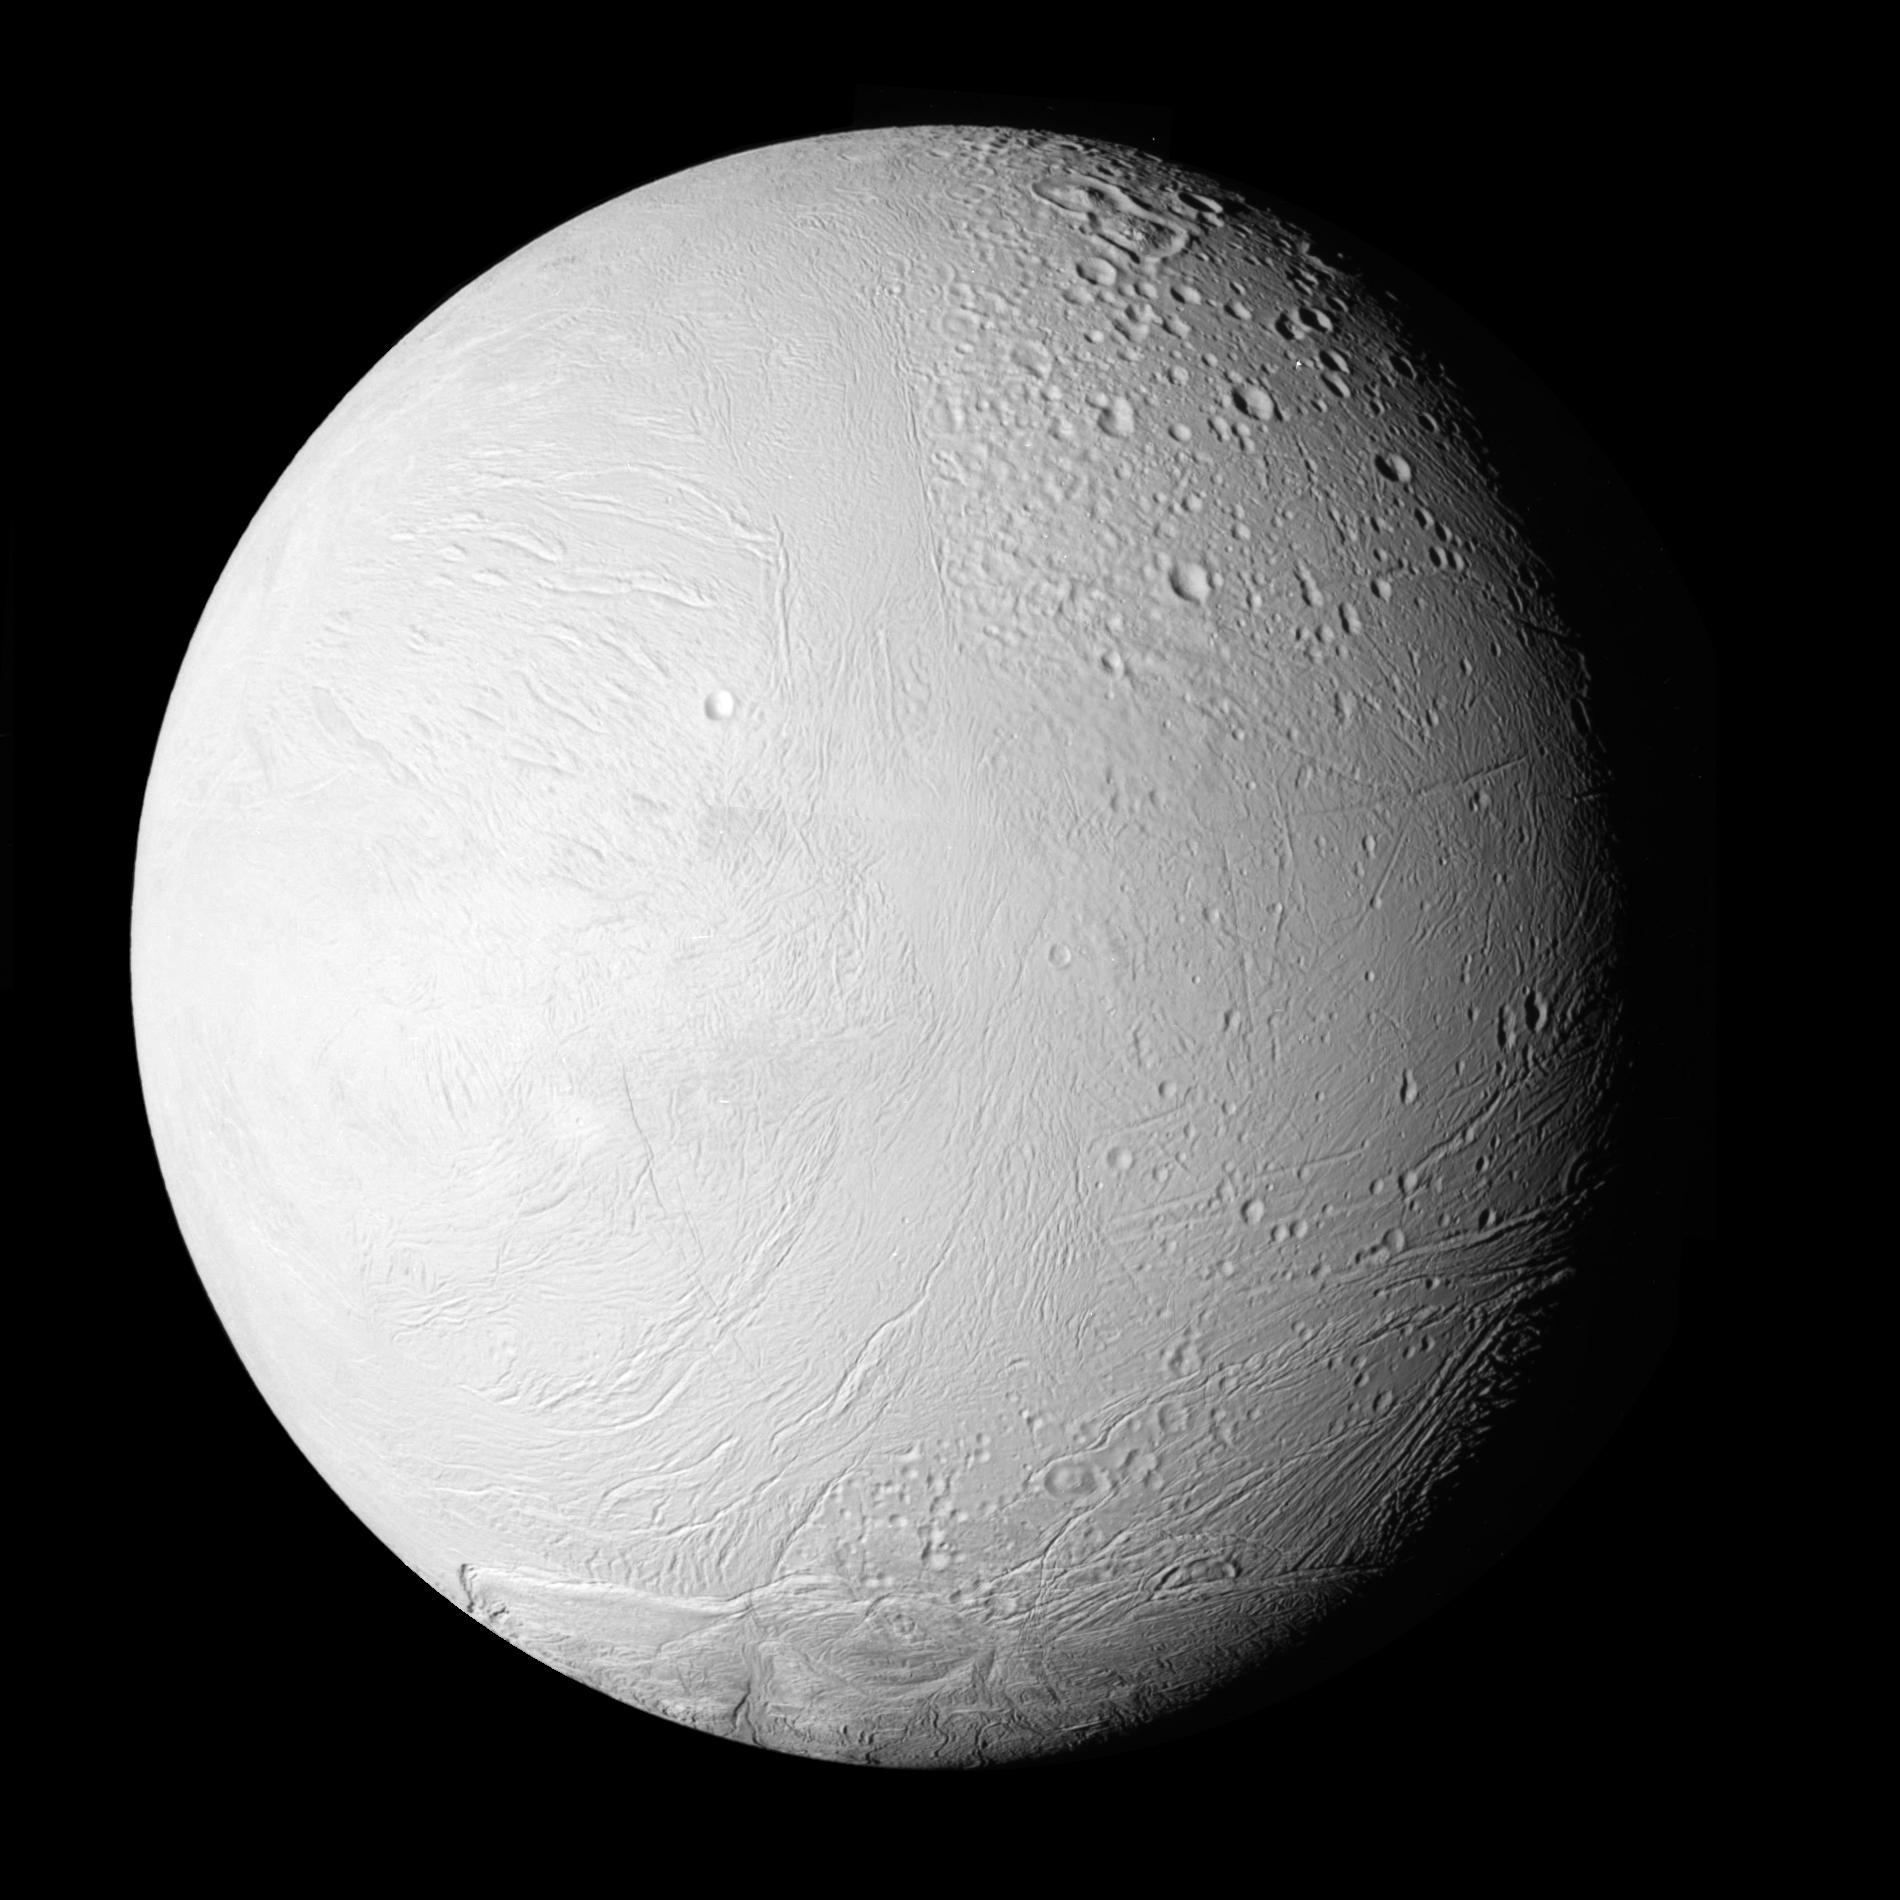 NASA’s Cassini spacecraft shows a new view of Saturn’s moon Enceladus in a whole-disk mosaic of the geologically active moon's leading, or western, hemisphere.